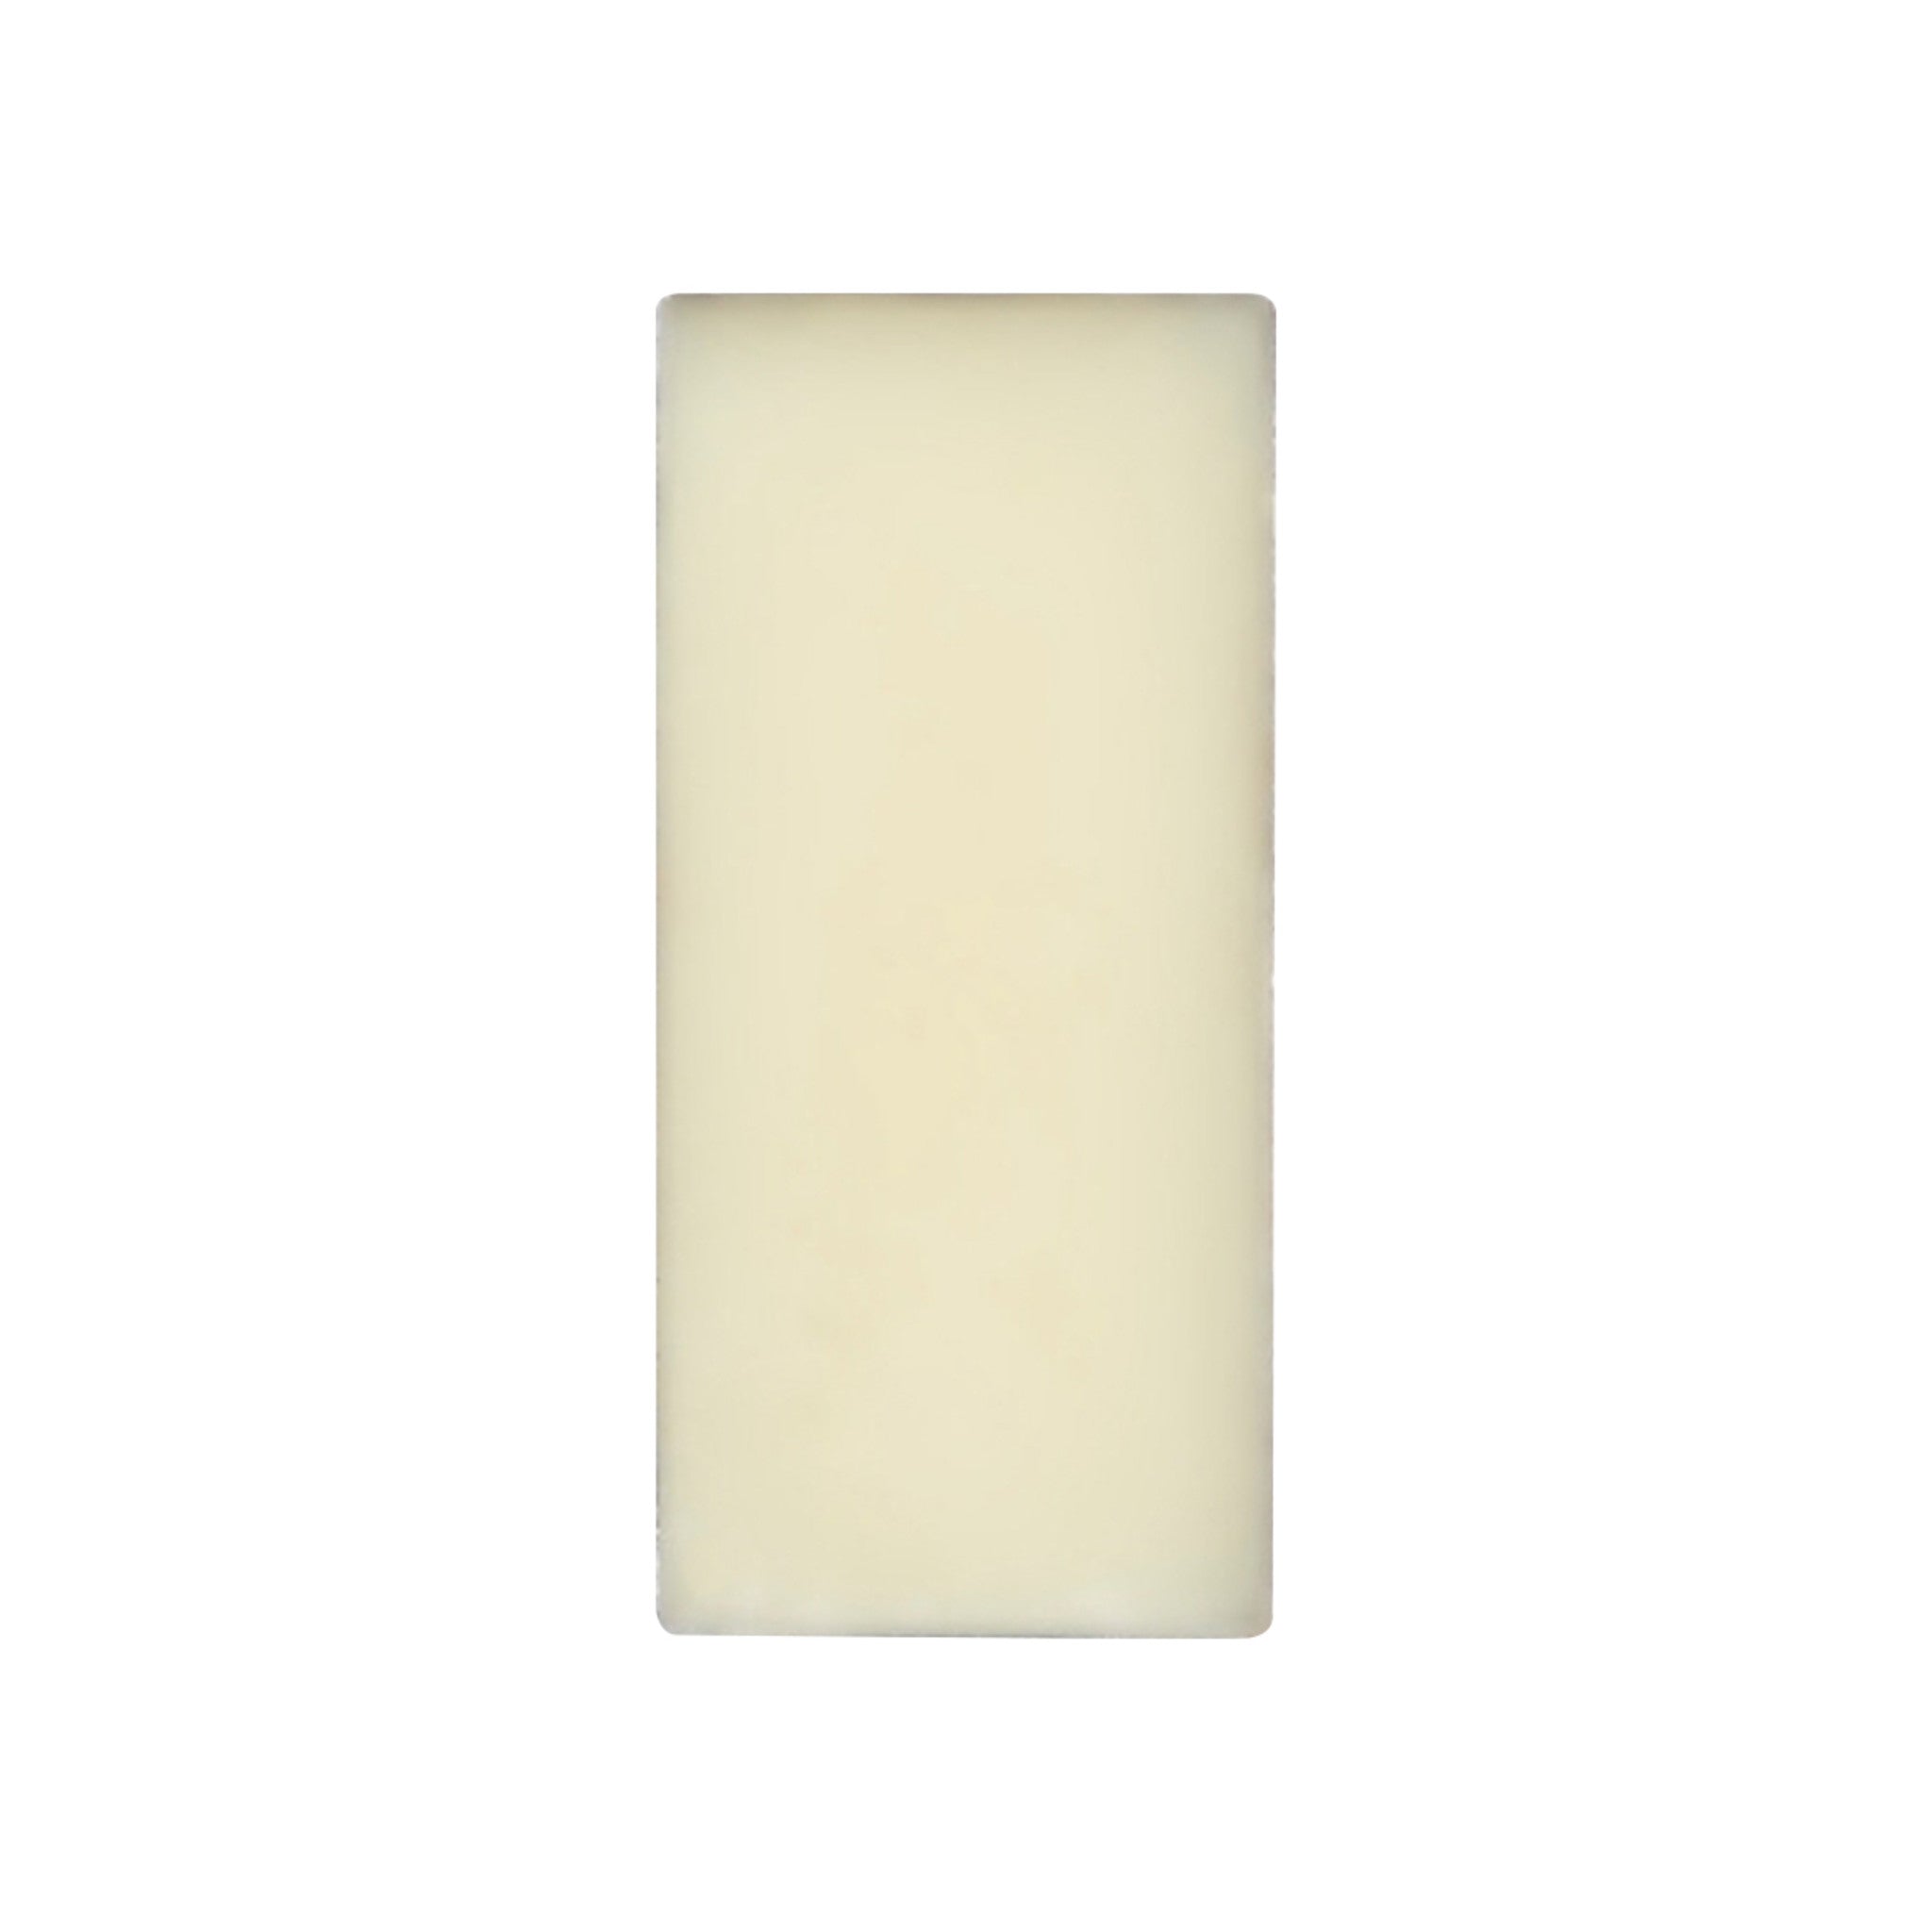 Kjaer Weis Lip Balm Refill main image. This product is in the color clear